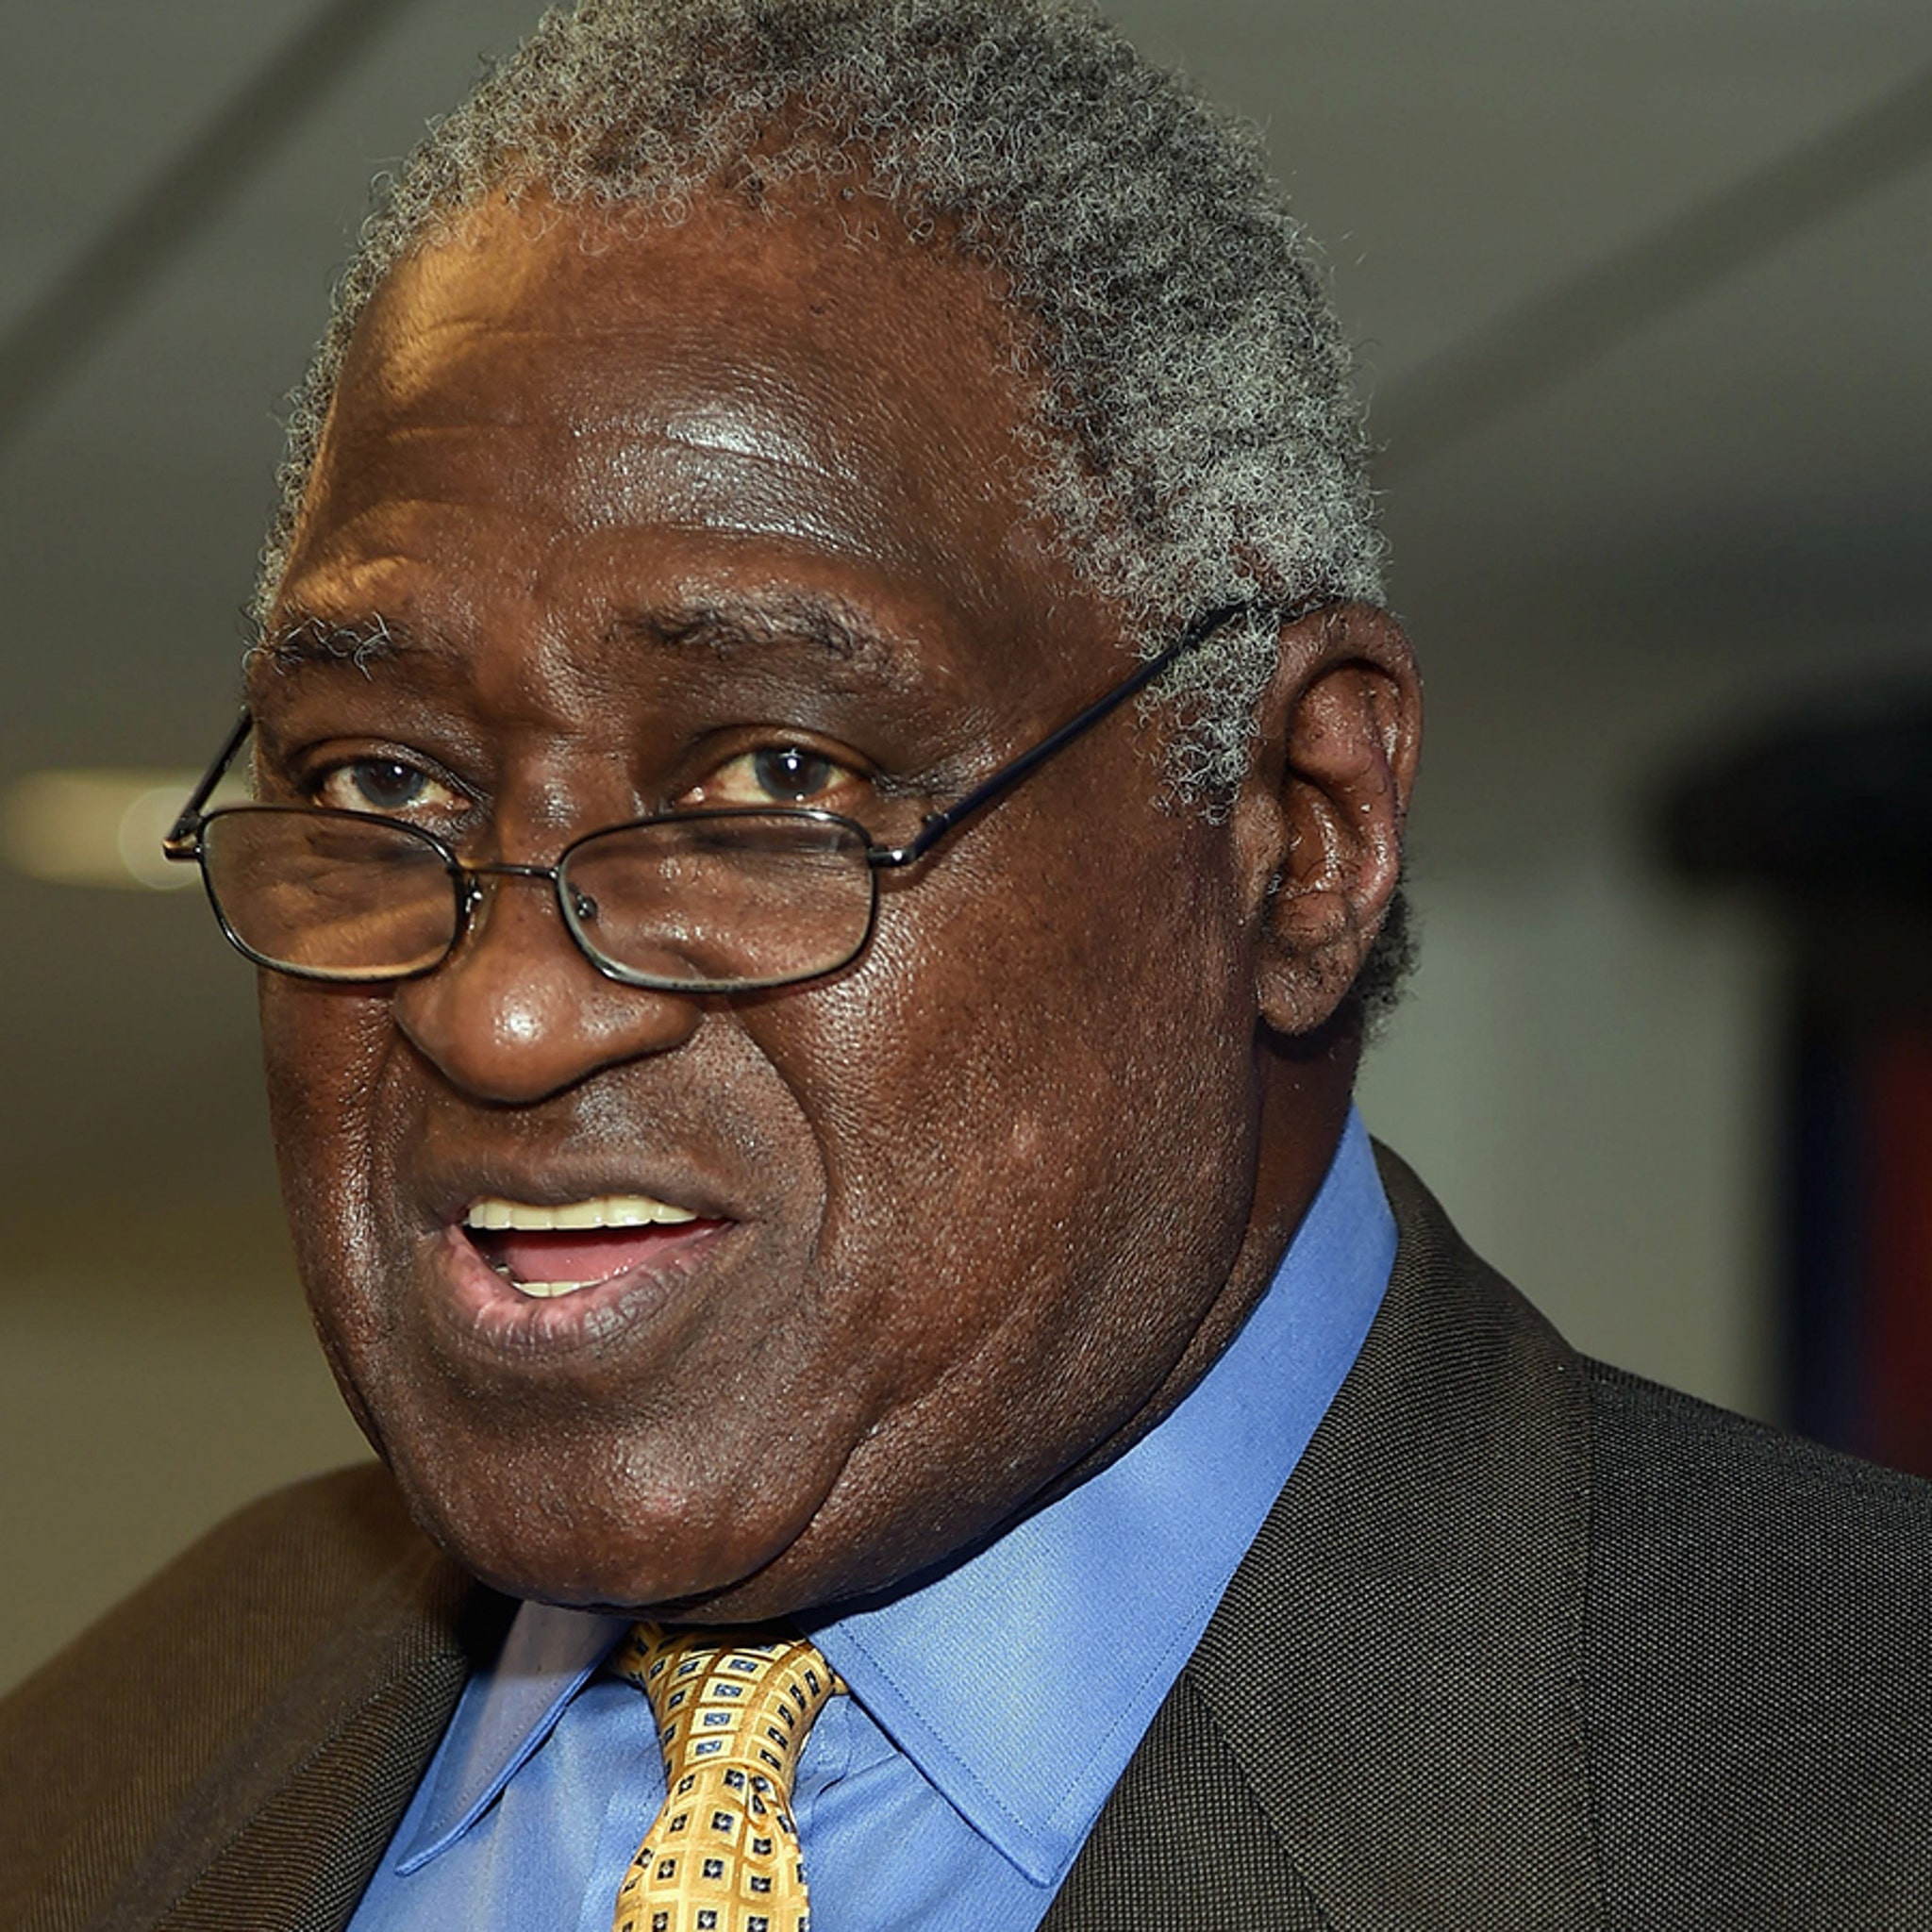 Willis Reed, New York Knicks legend and Hall of Famer, passes away